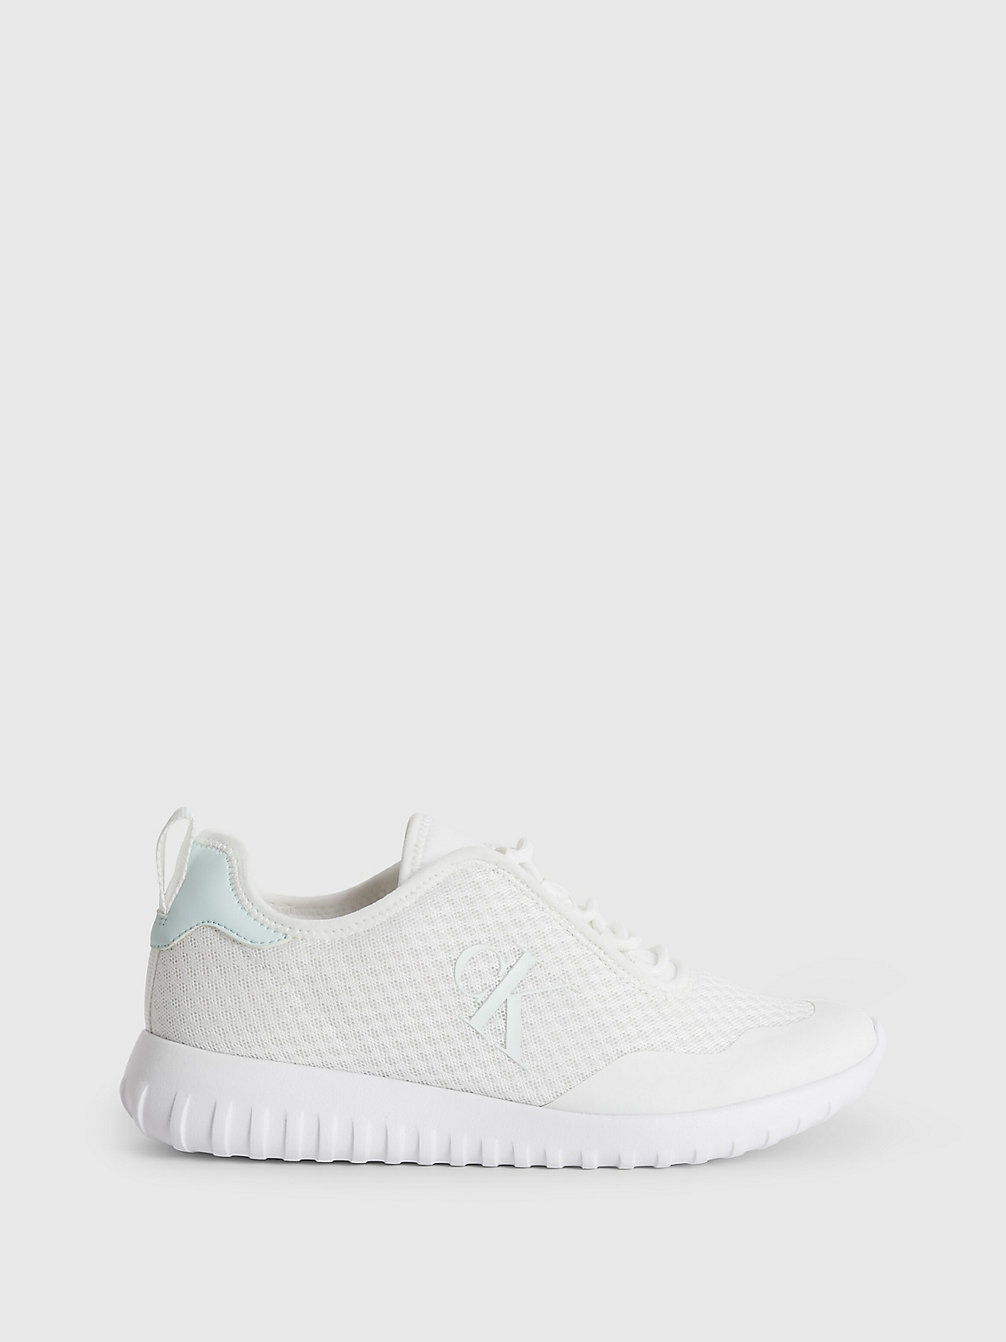 WHITE/CREAMY WHITE > Sneakers Van Gerecycled Mesh > undefined dames - Calvin Klein